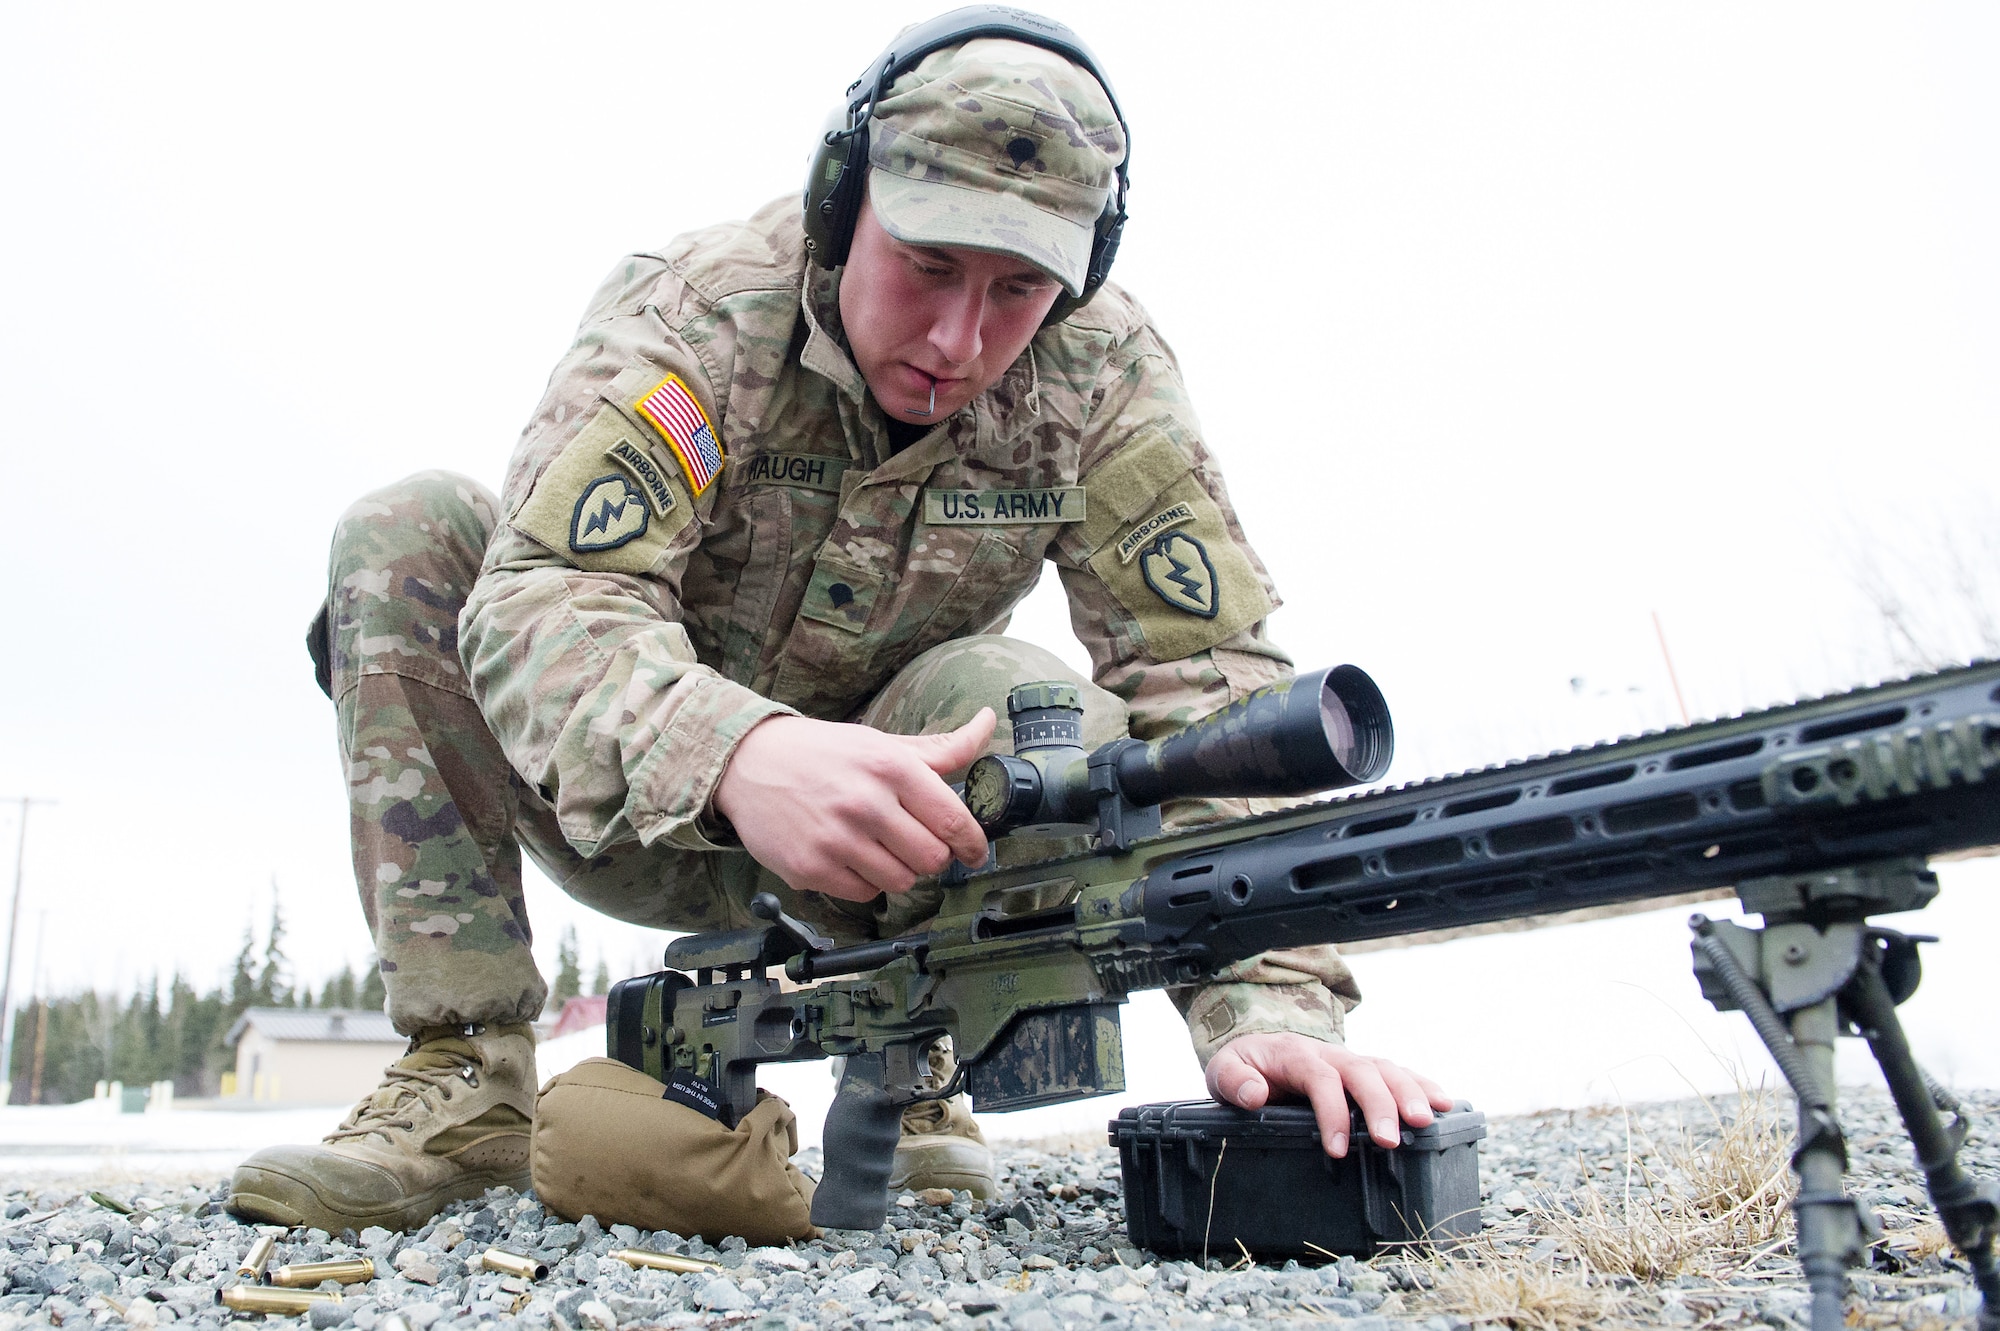 Army Spc. Eric Haugh, a native of Graham, Wash., assigned to Charlie Troop, 1st Squadron, 40th Cavalry Regiment (Airborne), 4th Infantry Brigade Combat Team (Airborne), 25th Infantry Division, U.S. Army Alaska, adjusts the scope on his M2010 Enhanced Sniper Rifle on Statler range at Joint Base Elmendorf-Richardson, Alaska, April 6, 2018, during marksmanship training.  A sniper's main responsibility is to deliver discriminatory, highly accurate rifle fire against enemy targets that cannot be engaged successfully by the regular rifleman due to range, size, location, fleeting nature, or visibility.